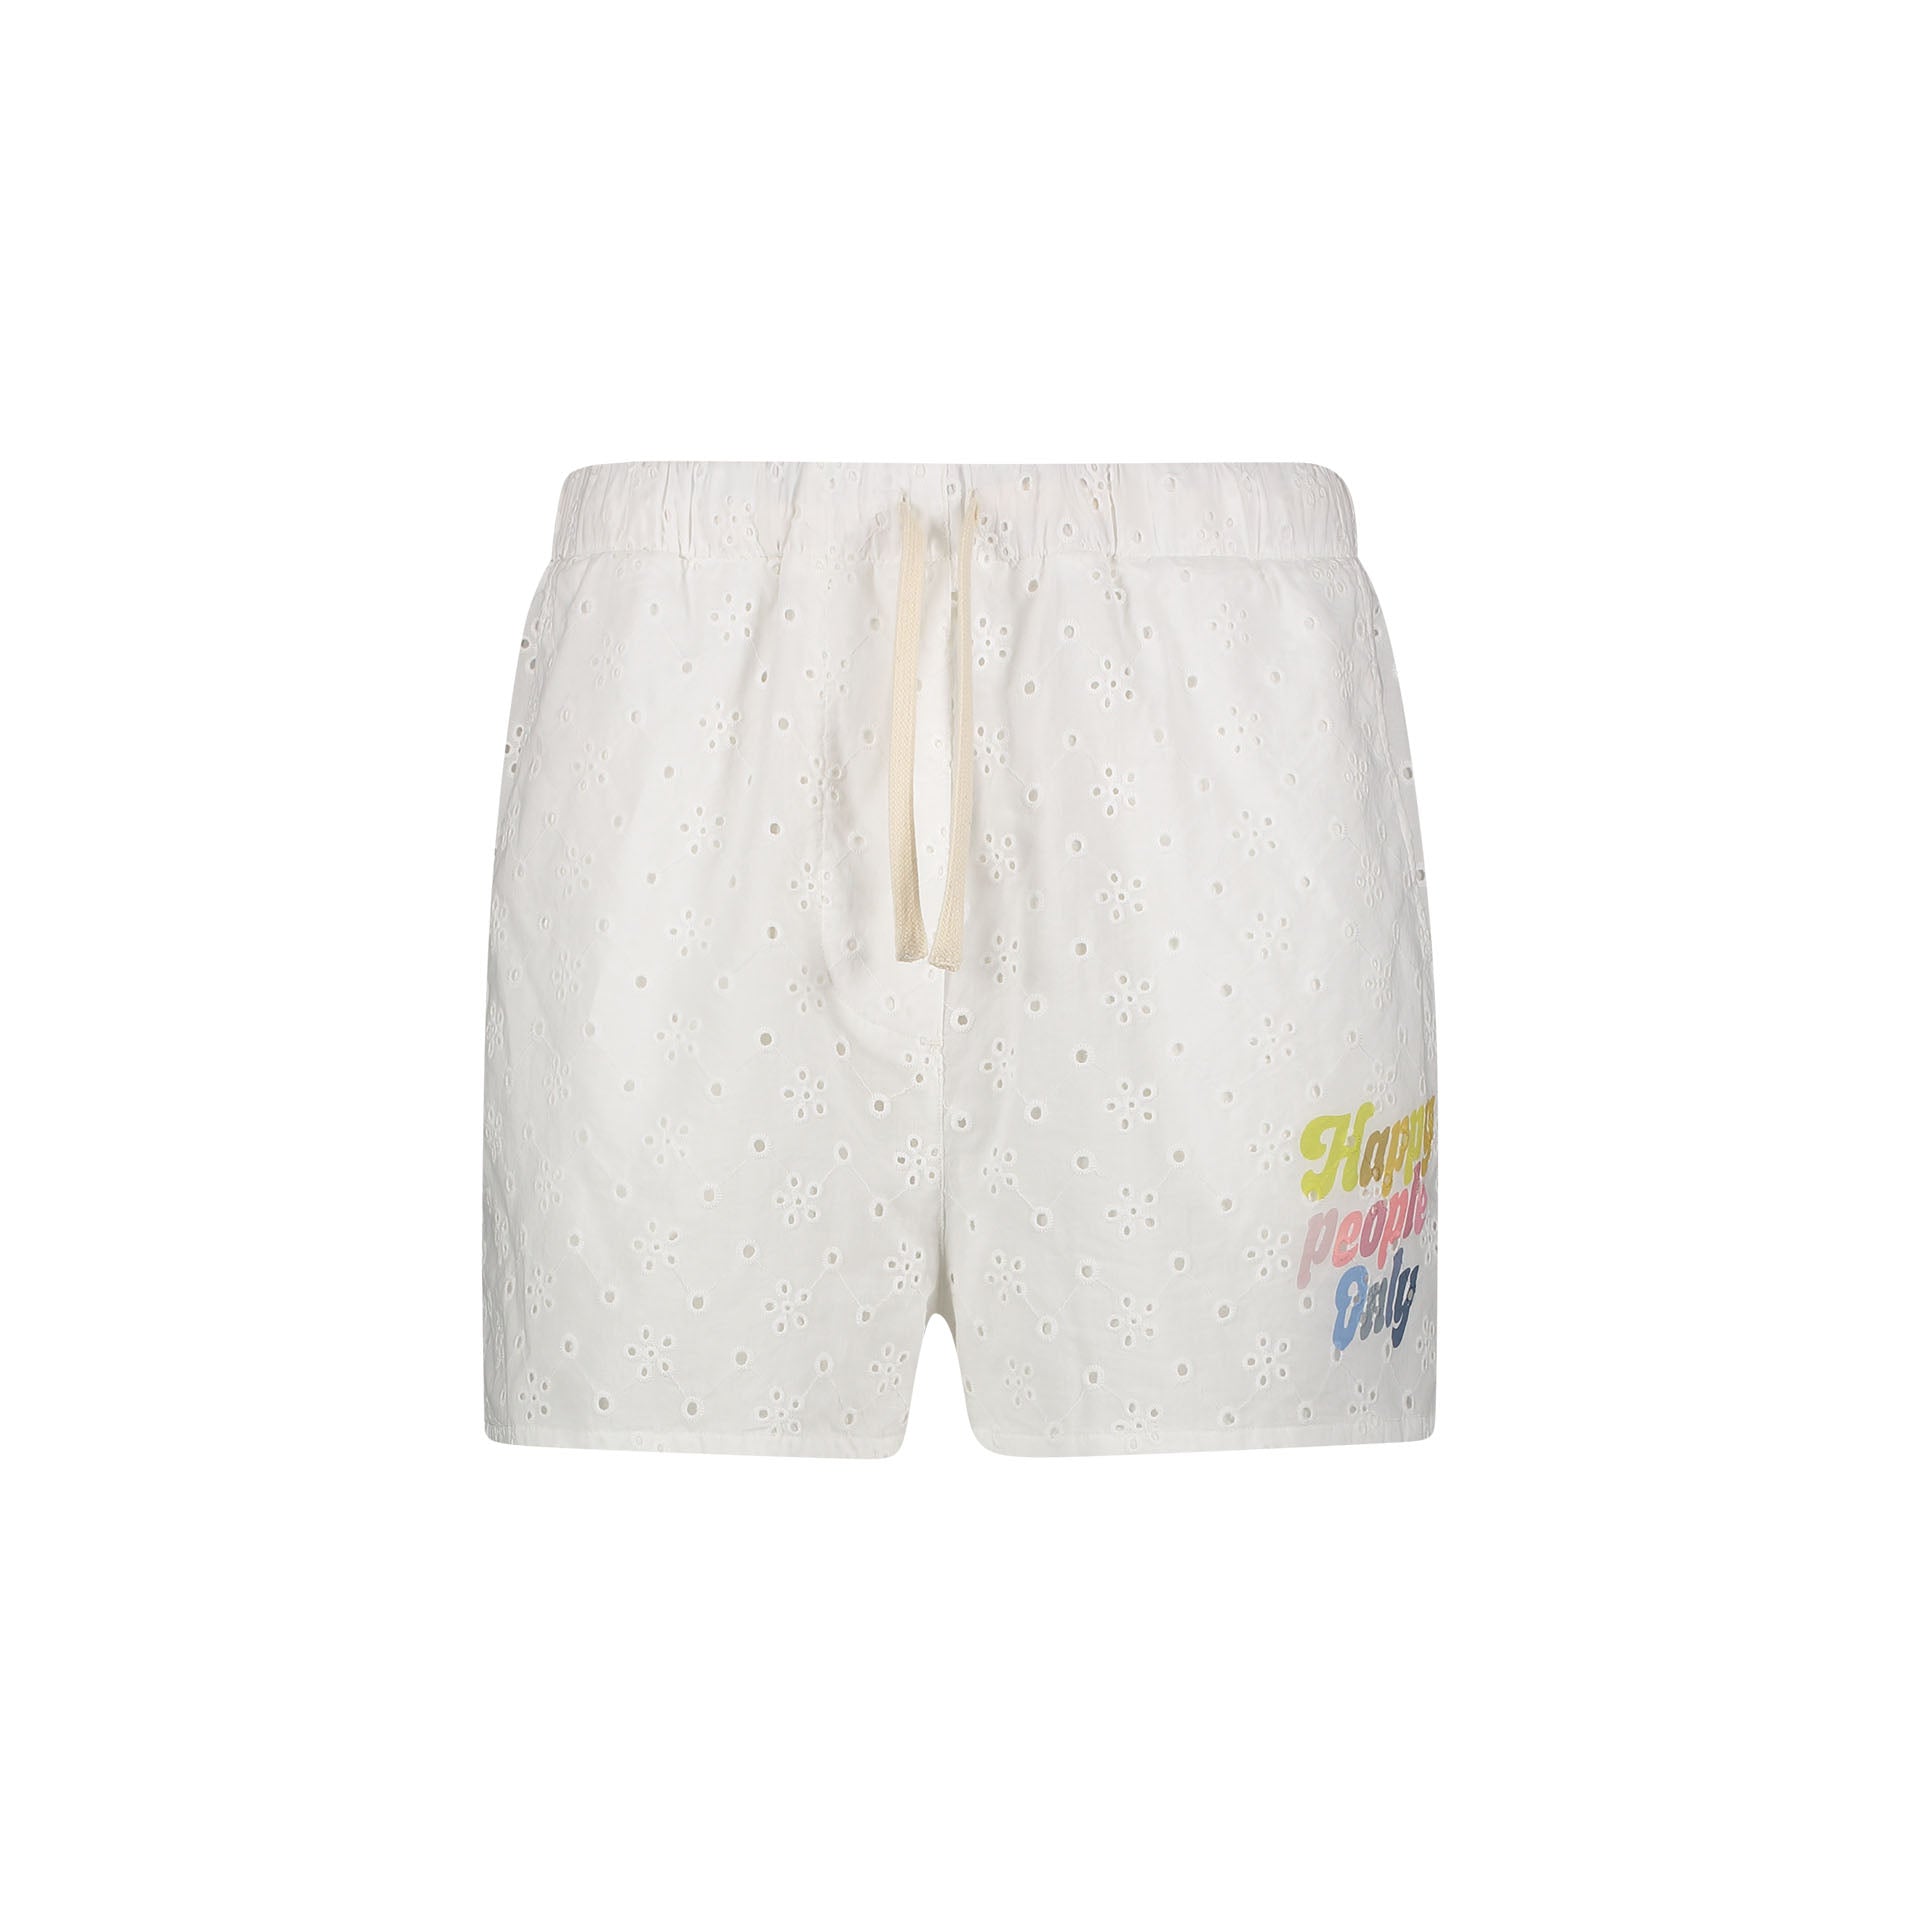 BRODERIE ANGLAIS SHORTS